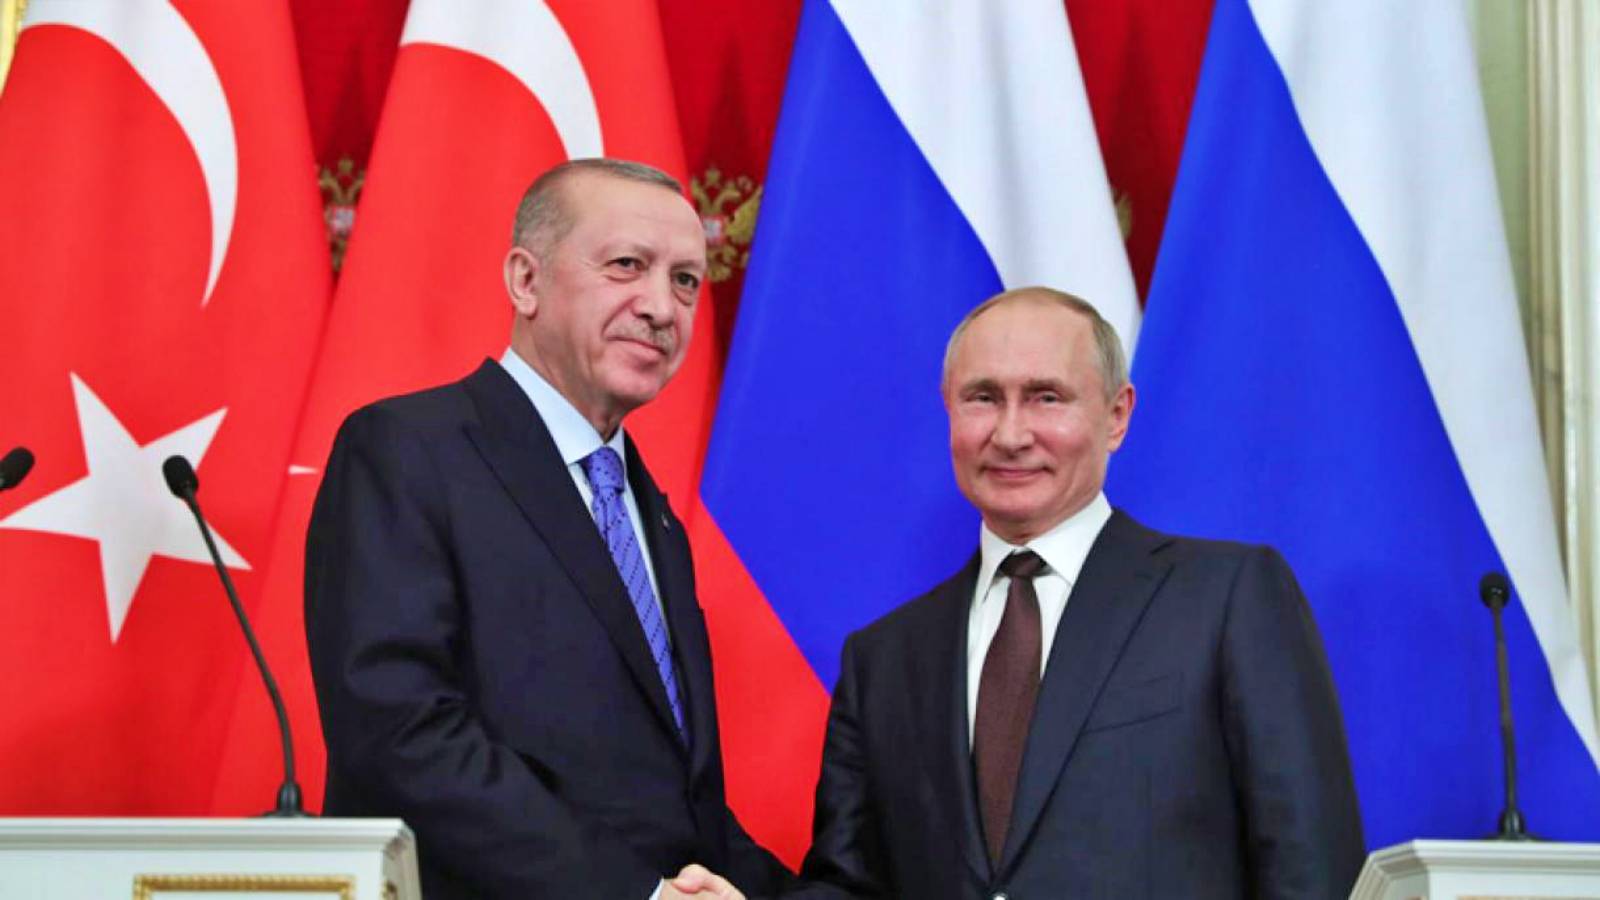 Turkey is Trying to Convince Russia to Extend the "Armistice" in Ukraine